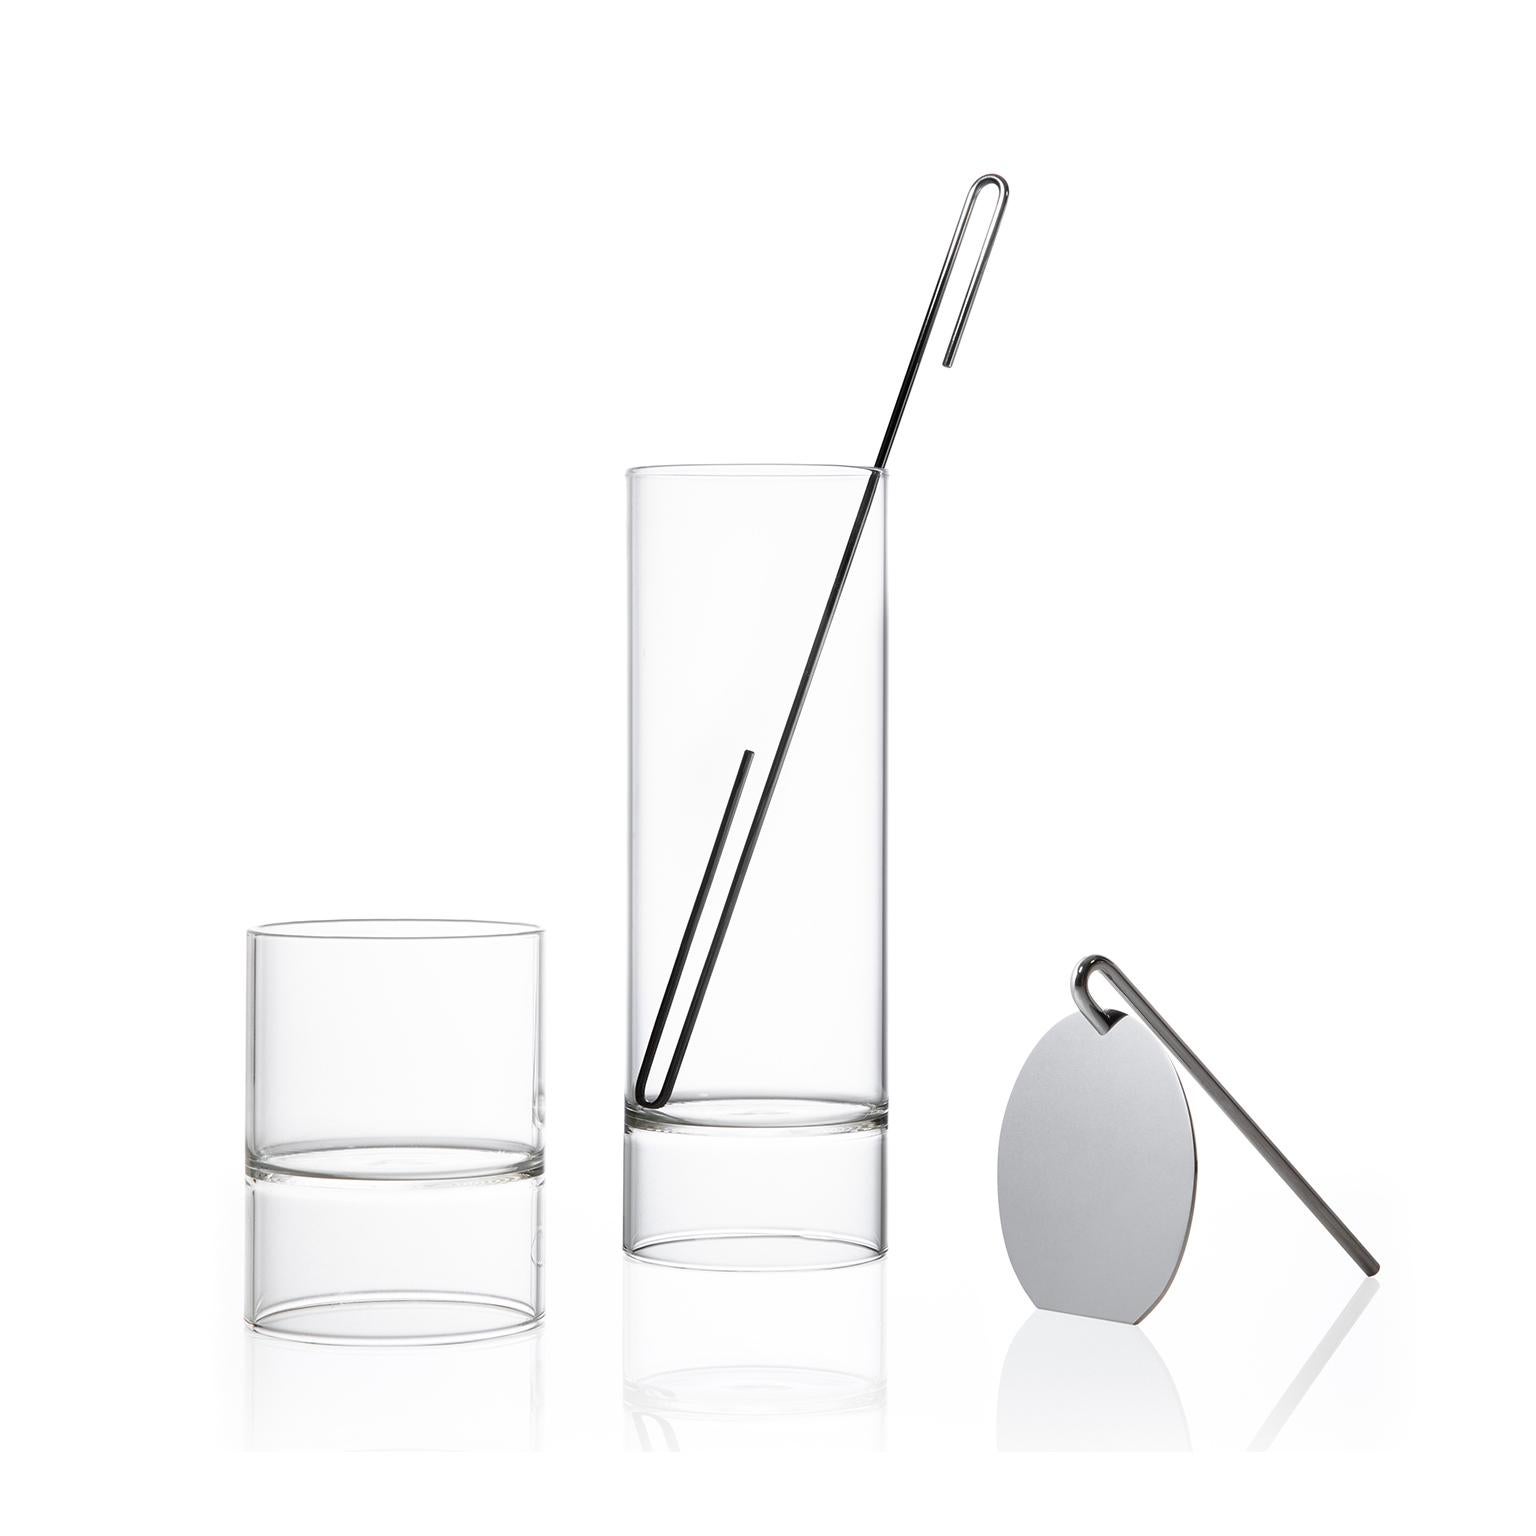 Strikingly simple in form, the contemporary handcrafted Revolution Collection Cocktail Mixer Pitcher Set is handcrafted in the Czech Republic by master glassblowers, and formed from a pure extrusion of handblown borosilicate glass. 

The cocktail